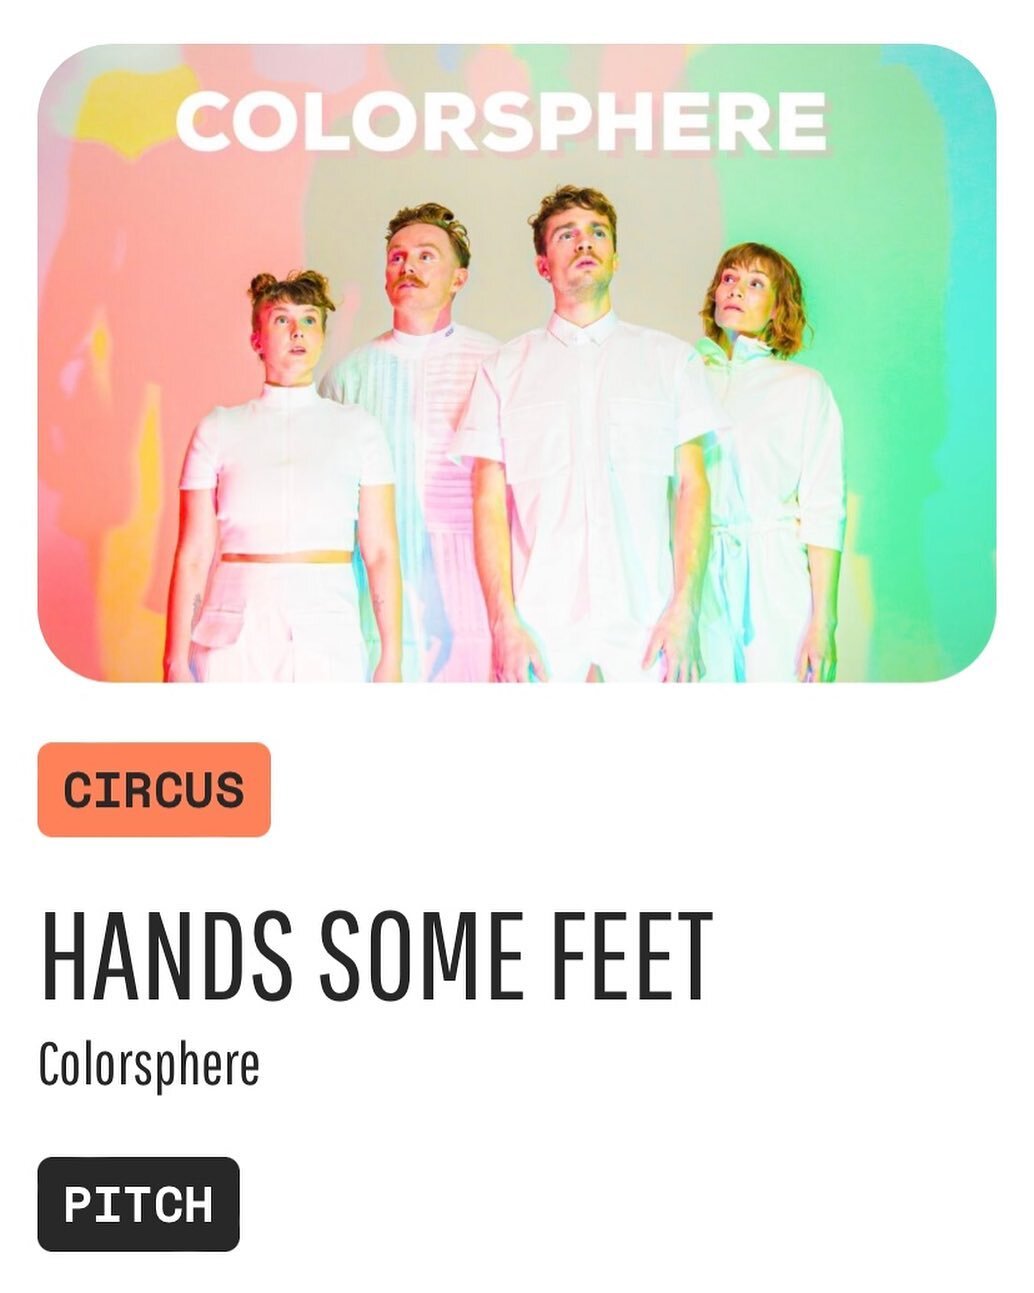 We are happy to announce that we&rsquo;ll be part of @performinghel 2023 with our upcoming show COLORSPHERE!

🟡 🟠 🟣

Colorsphere is a contemporary circus performance which seamlessly incorporates innovative technology, juggling, acrobatics and phy